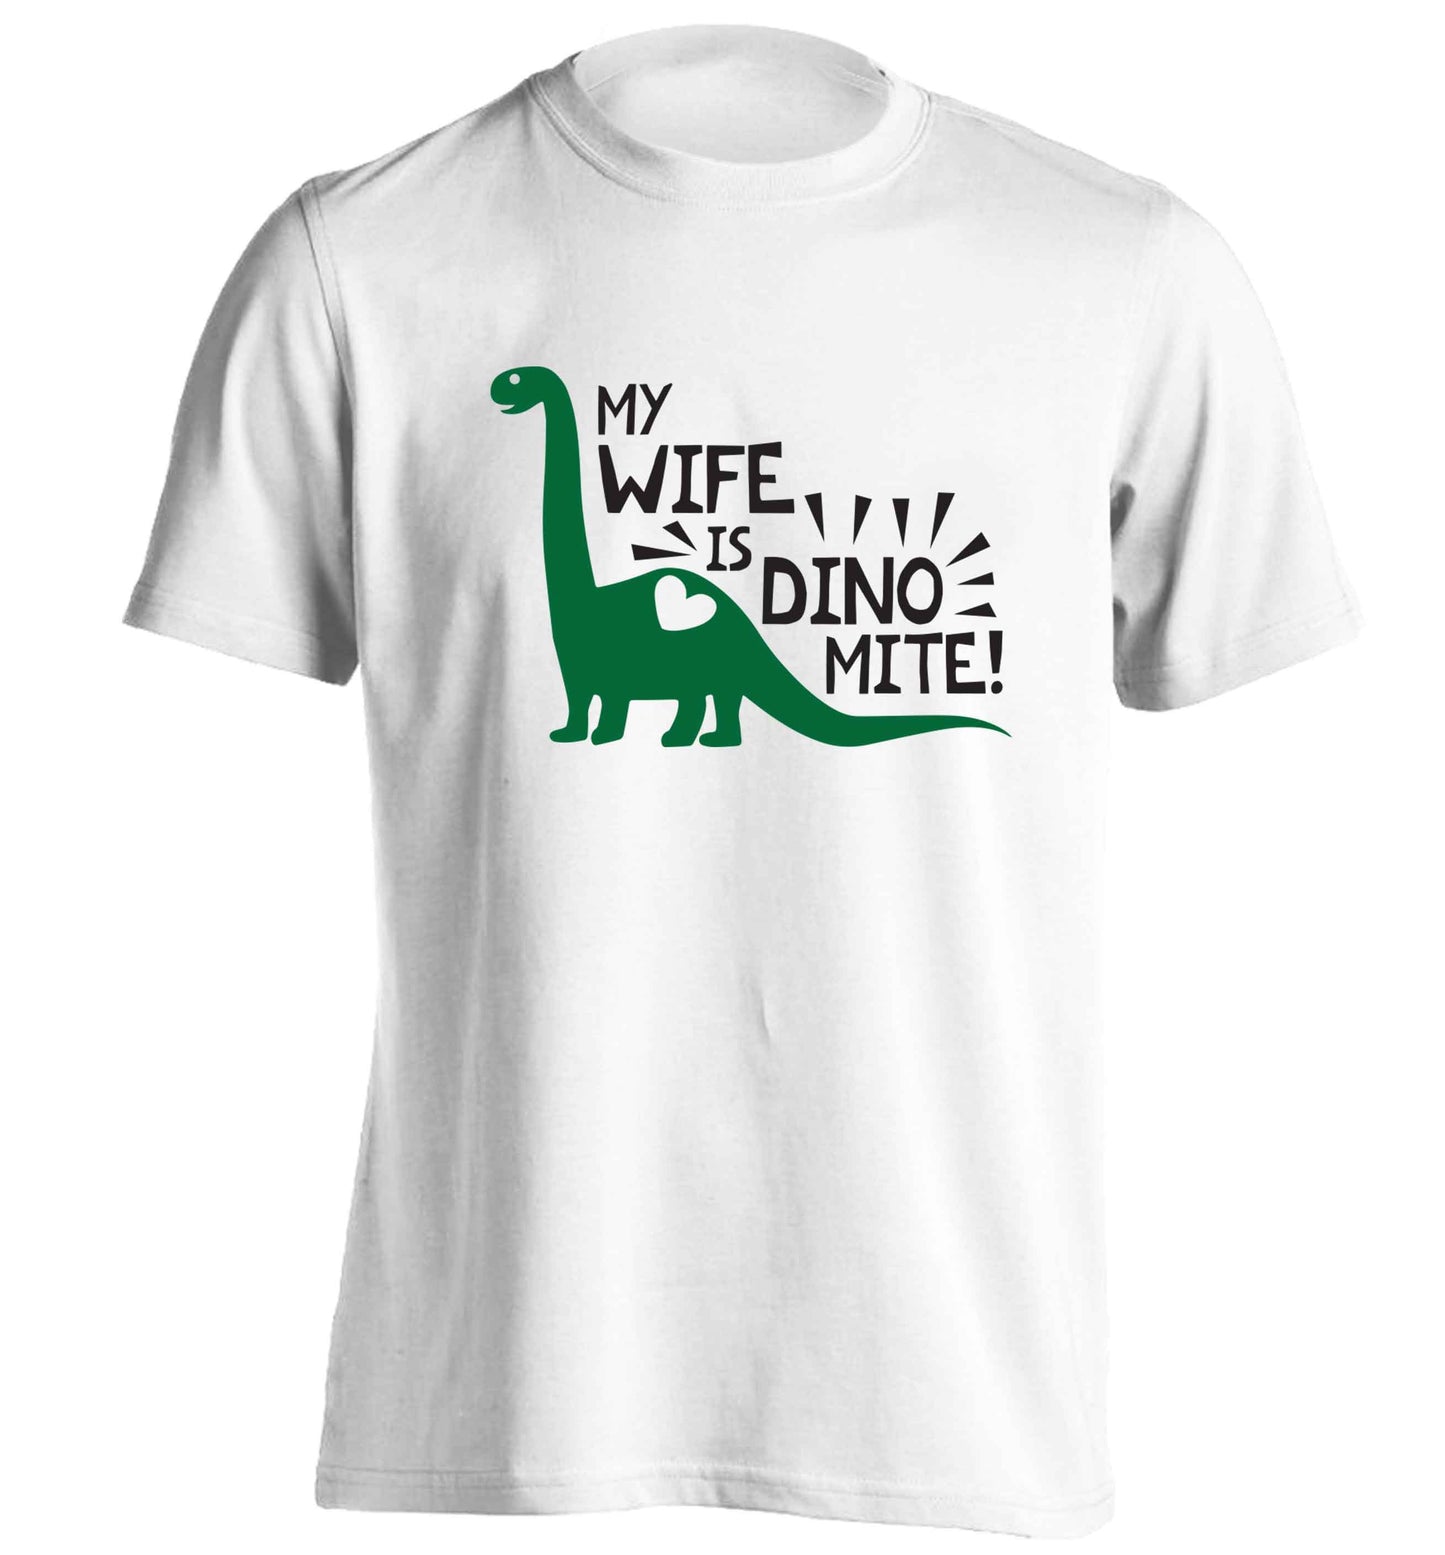 My wife is dinomite! adults unisex white Tshirt 2XL